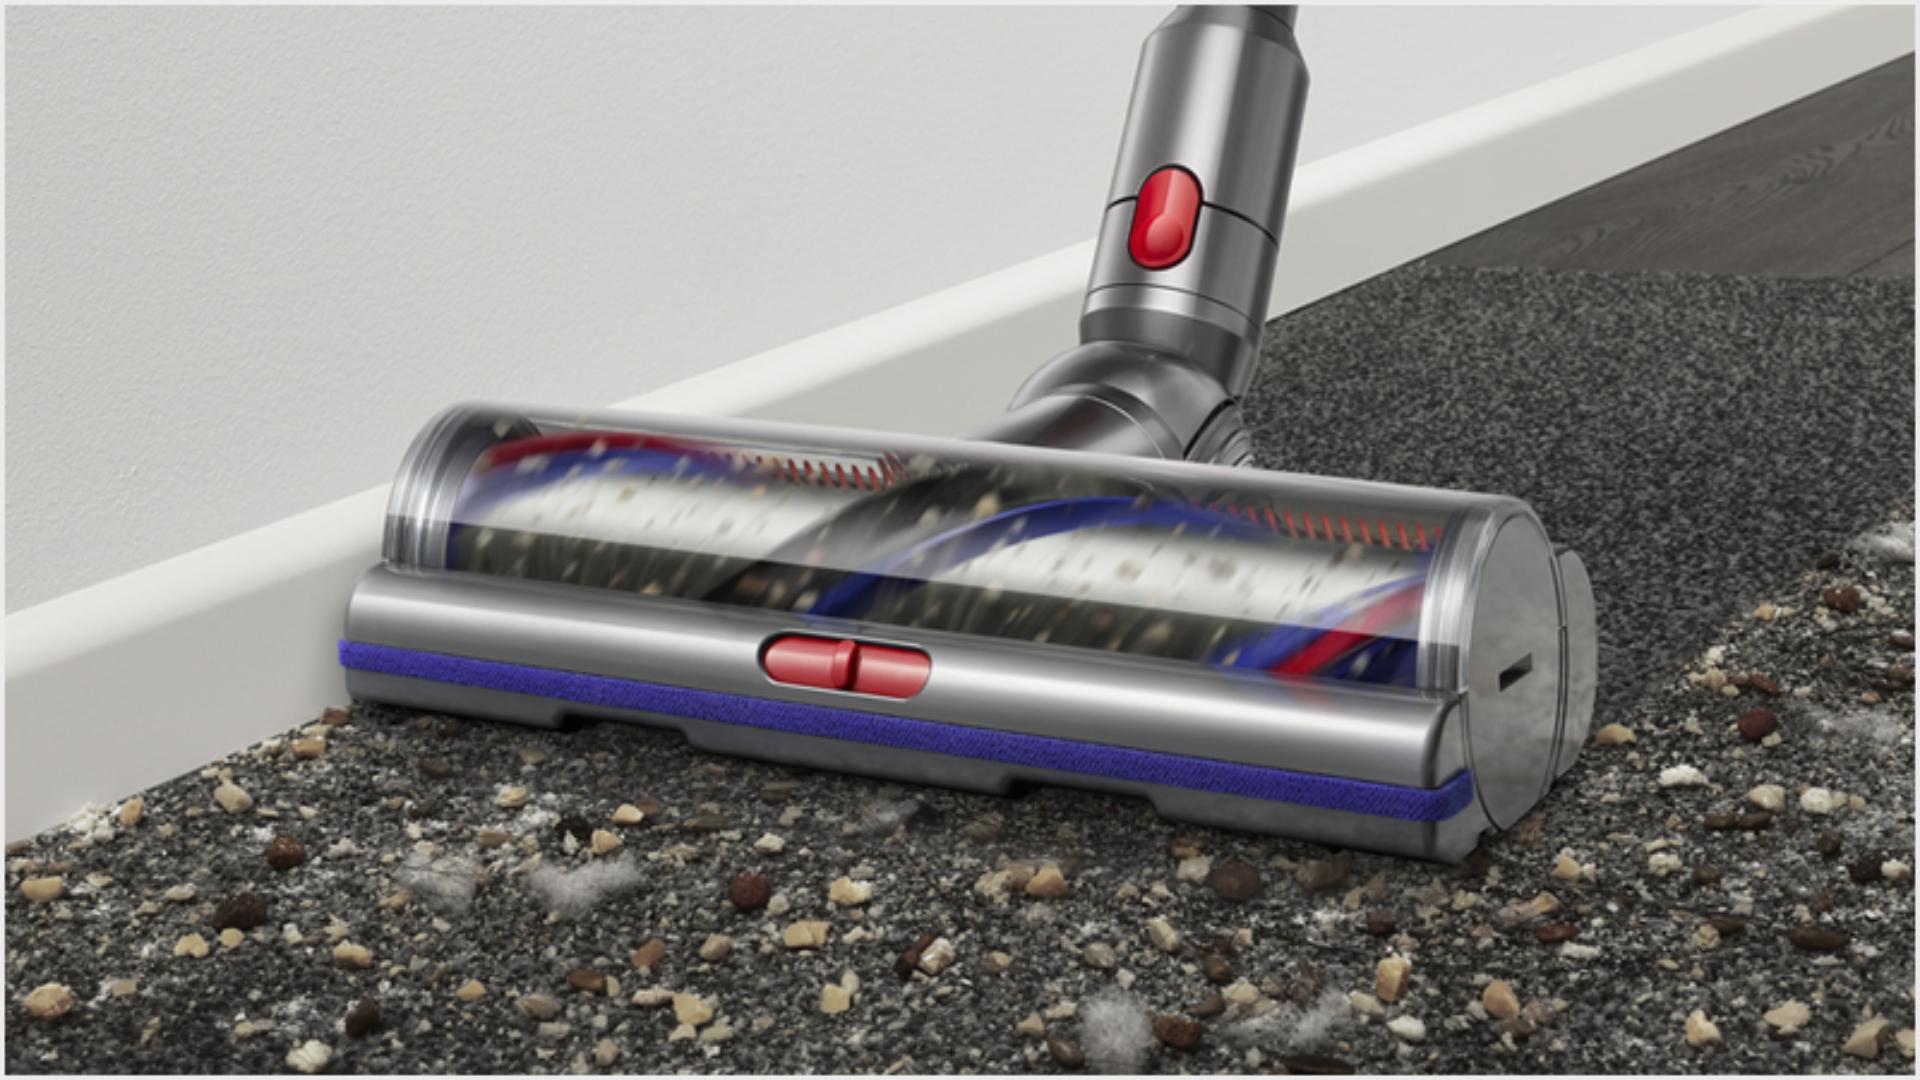 Close-up of Digital Motorbar cleaner head powerfully removing debris from a carpet.